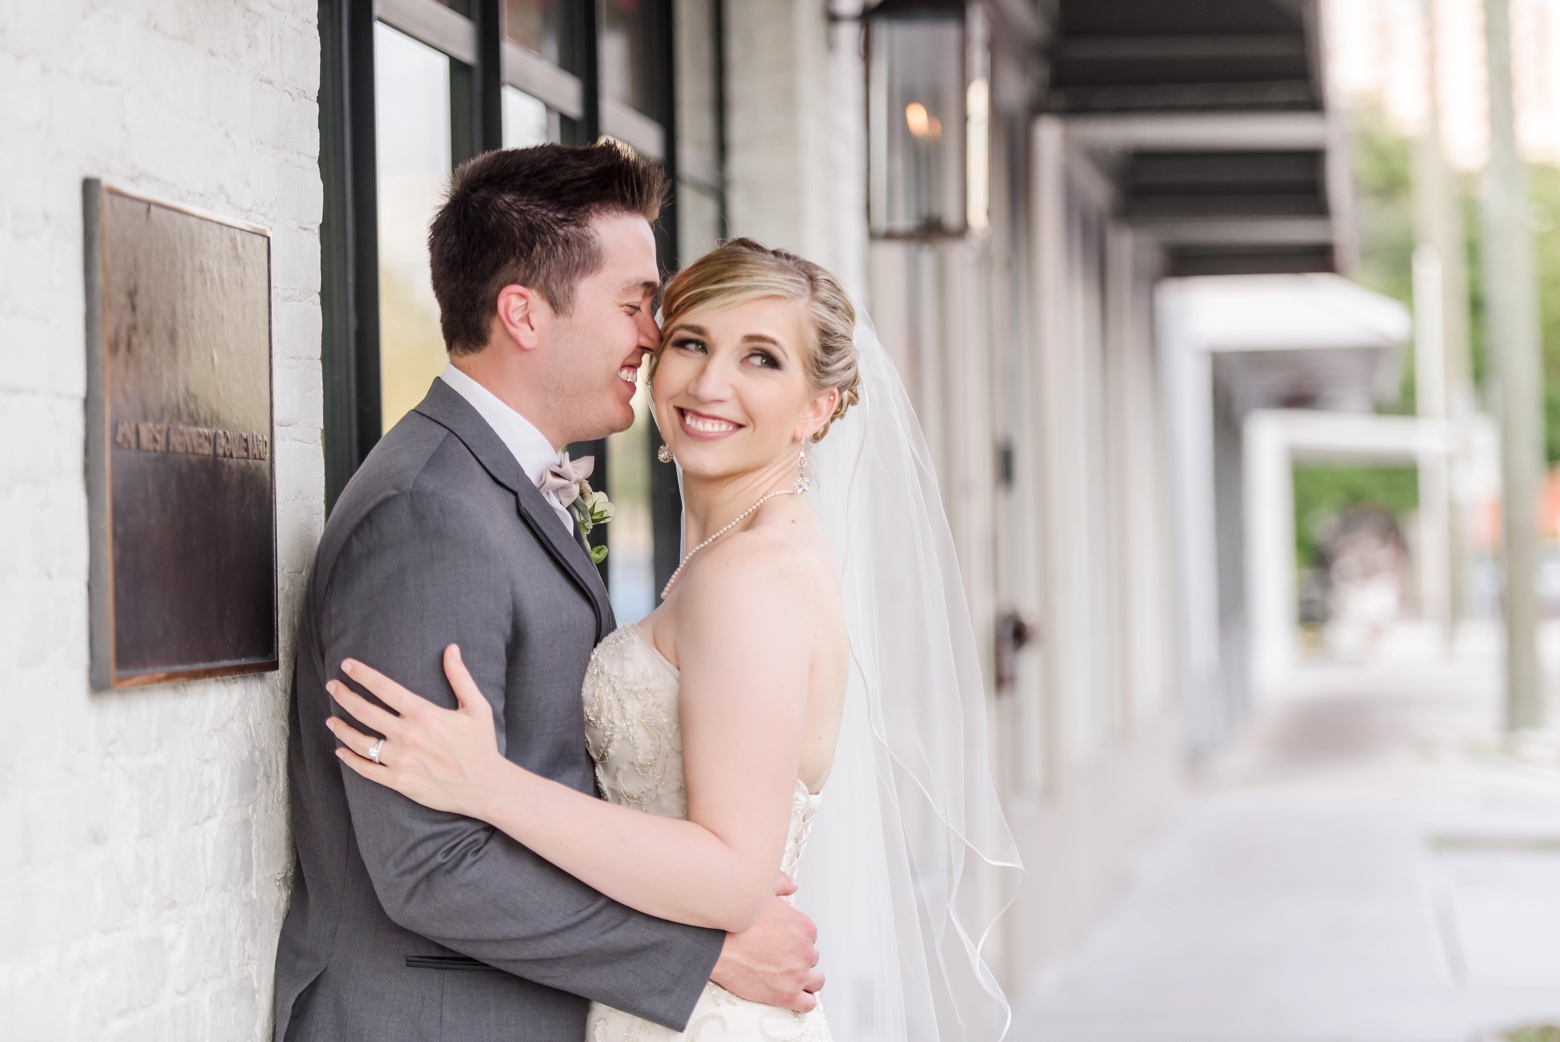 Beautiful portrait of the Bride and Groom along the white brick walls of the exterior of Oxford Exchange